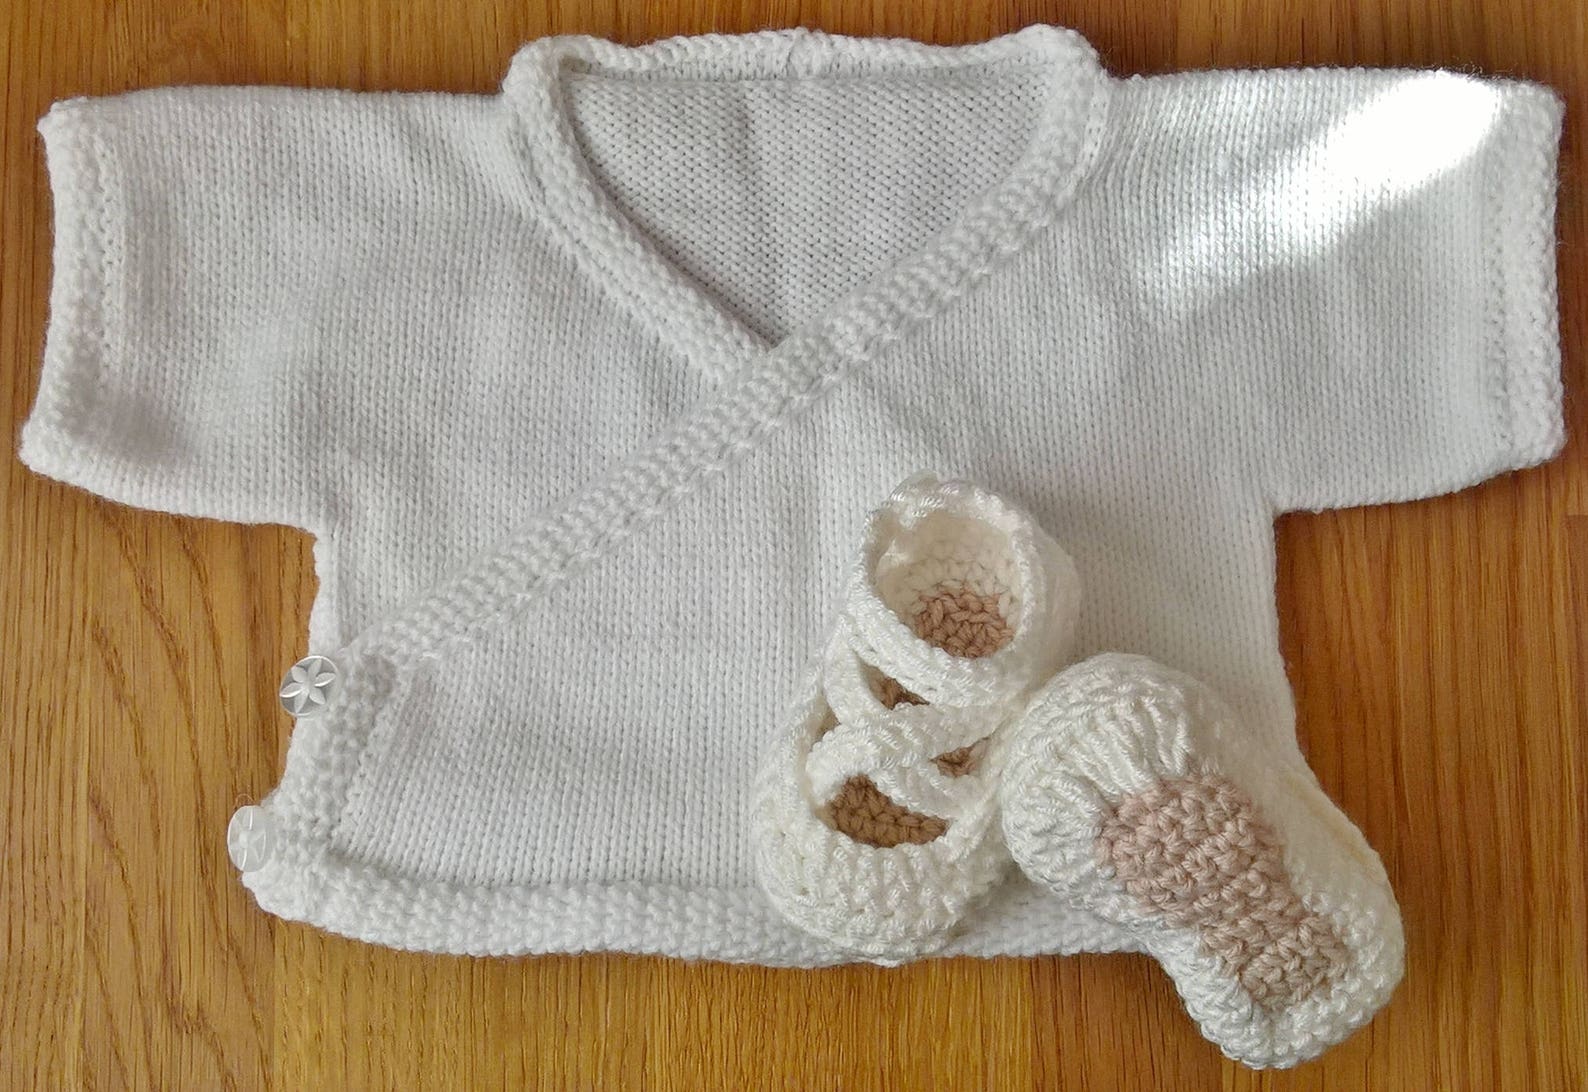 baby ballet wrap and shoes/ baby girl birthday gift/ ballet cardigan and shoes/ baby gift set/ baby knitwear gift/ crochet balle